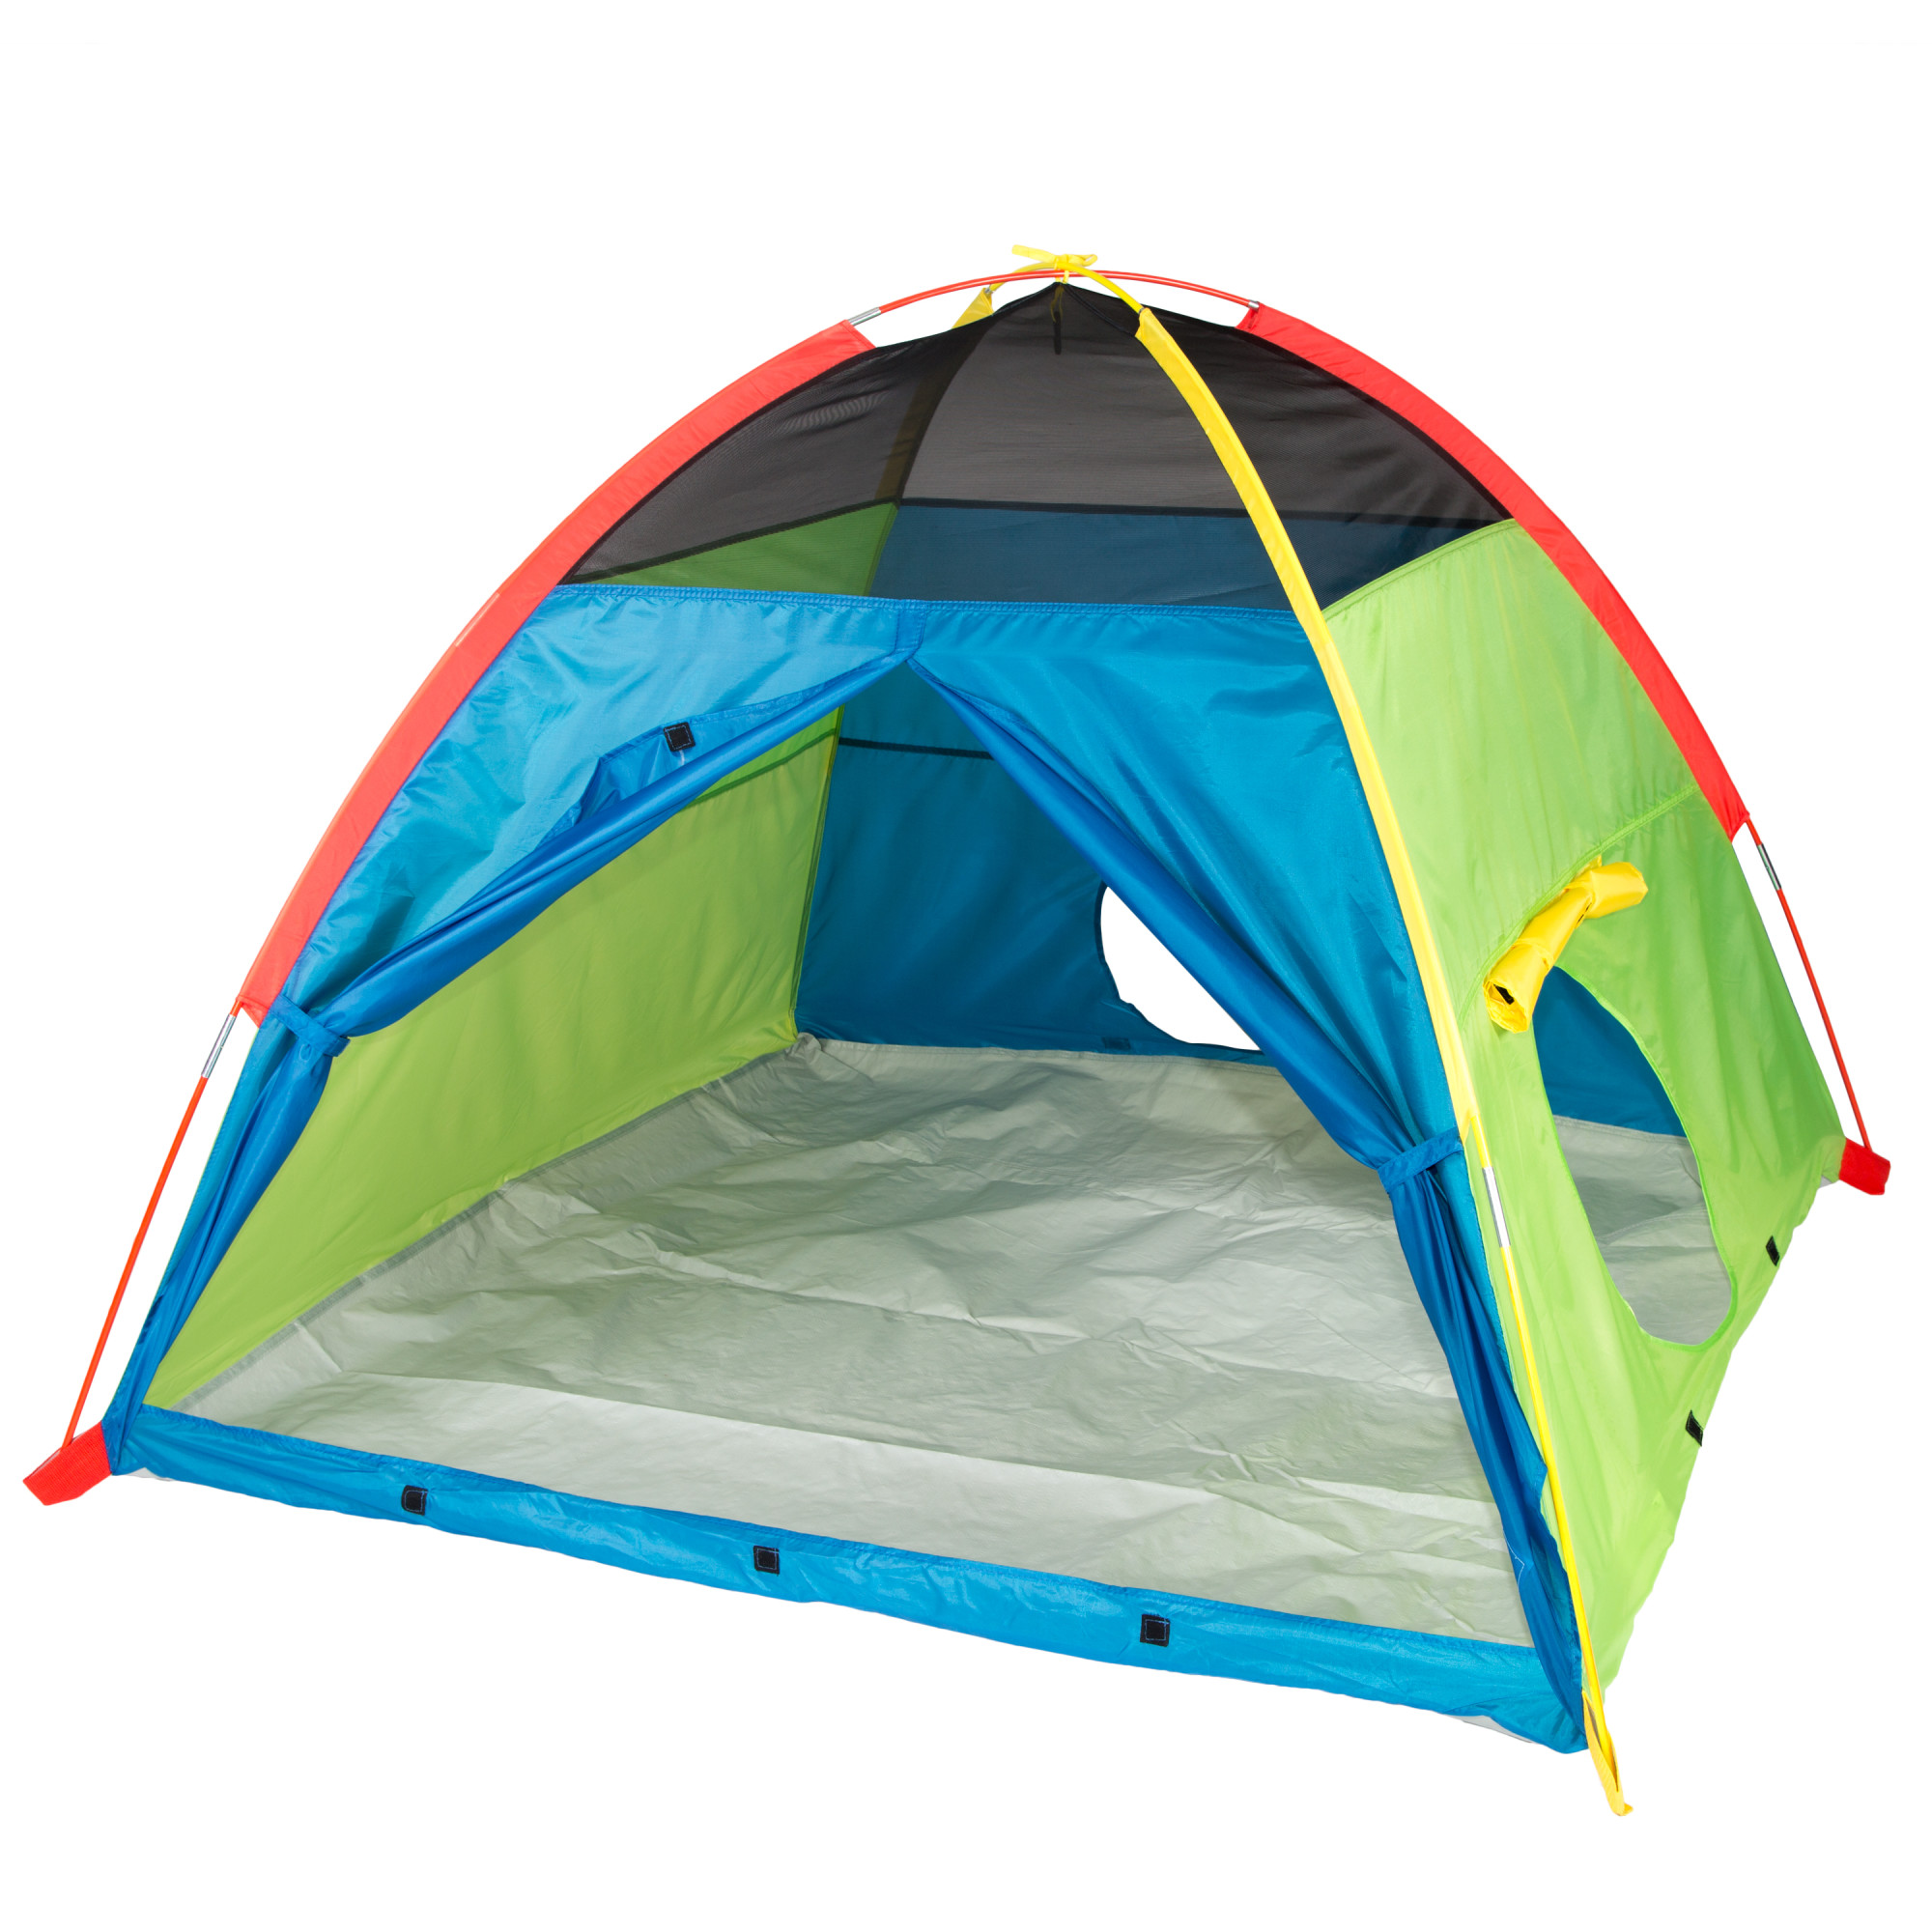 Pacific Play Tents Super Duper 4 Kid Play Tent - image 1 of 21